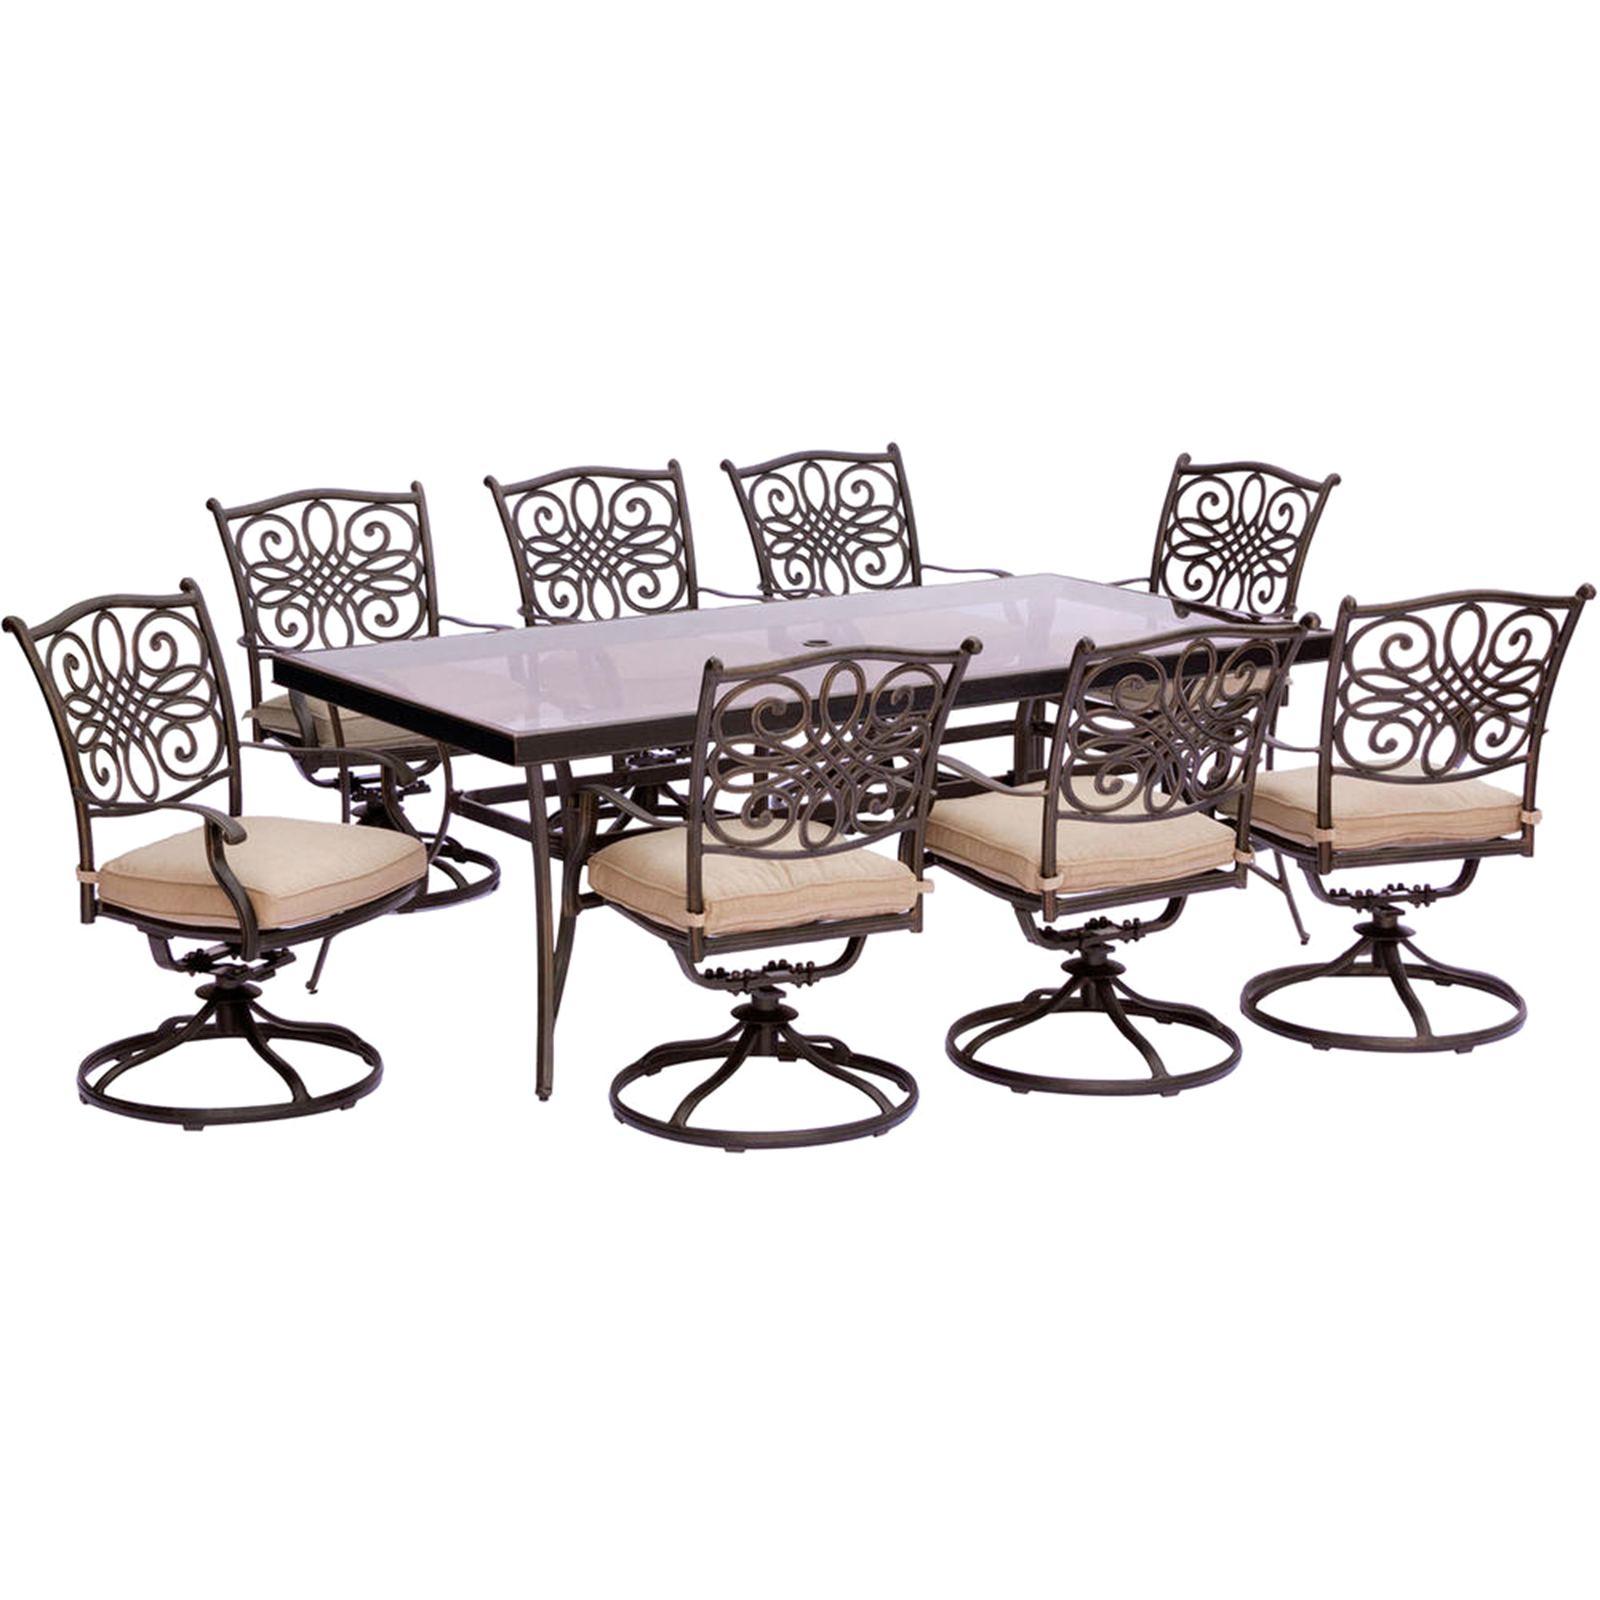 Hanover Traditions 9pc. Dining Table Set - Bronze